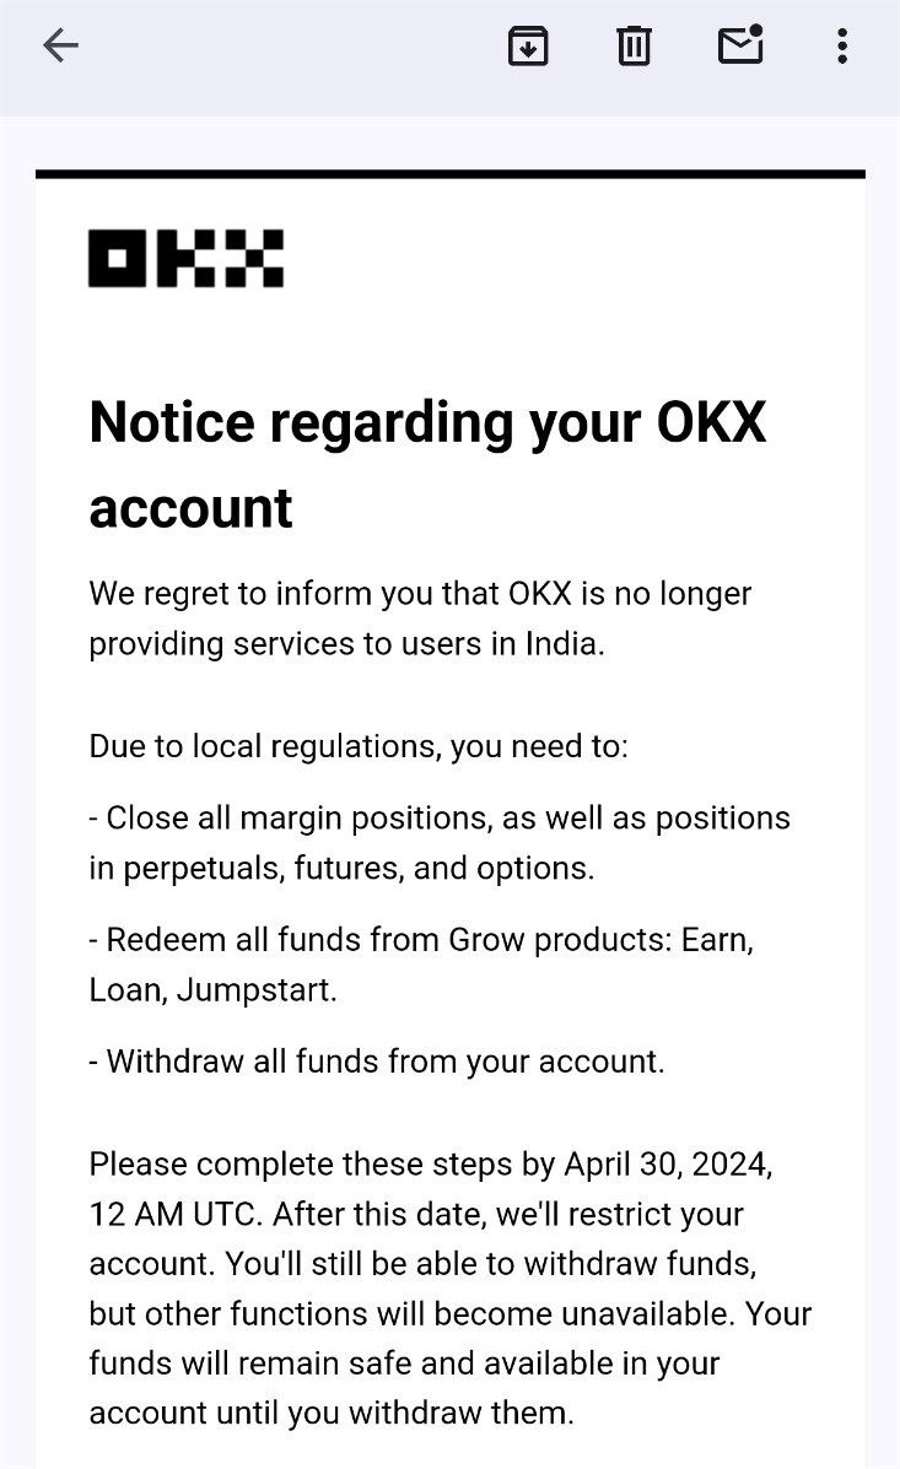 OKX is shutting down operations in India